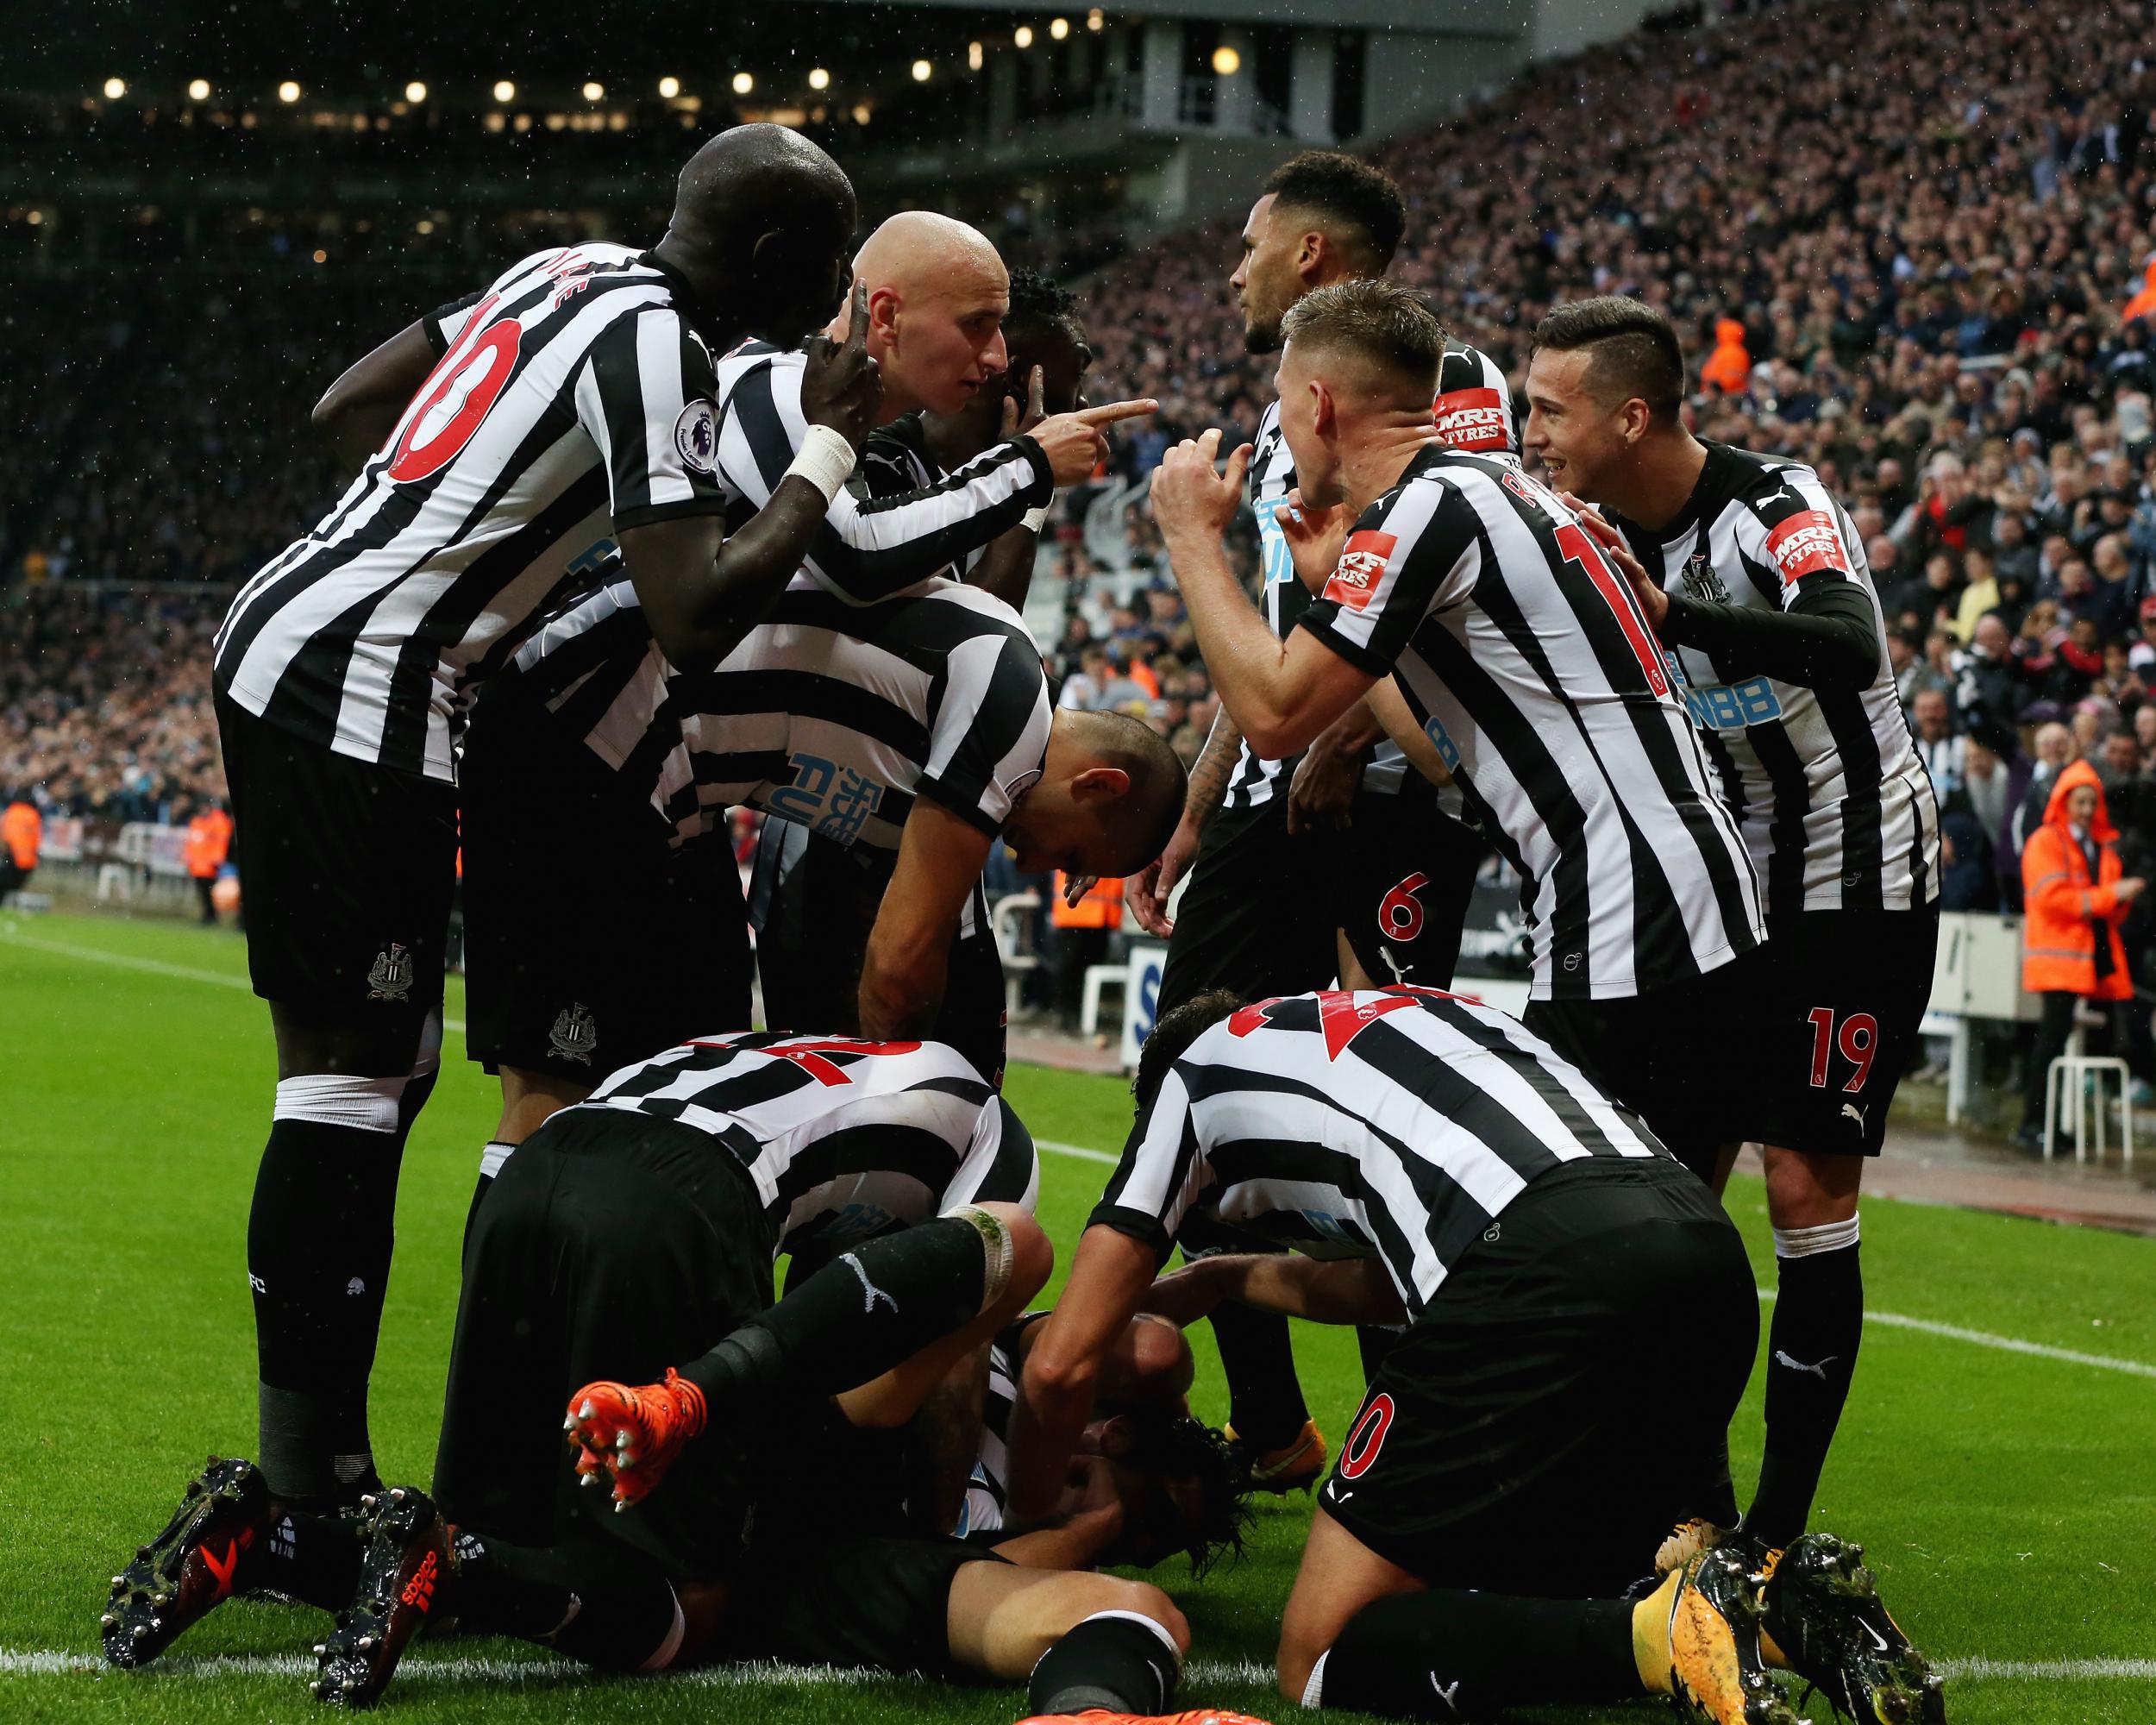 Newcastle are up to sixth with the win